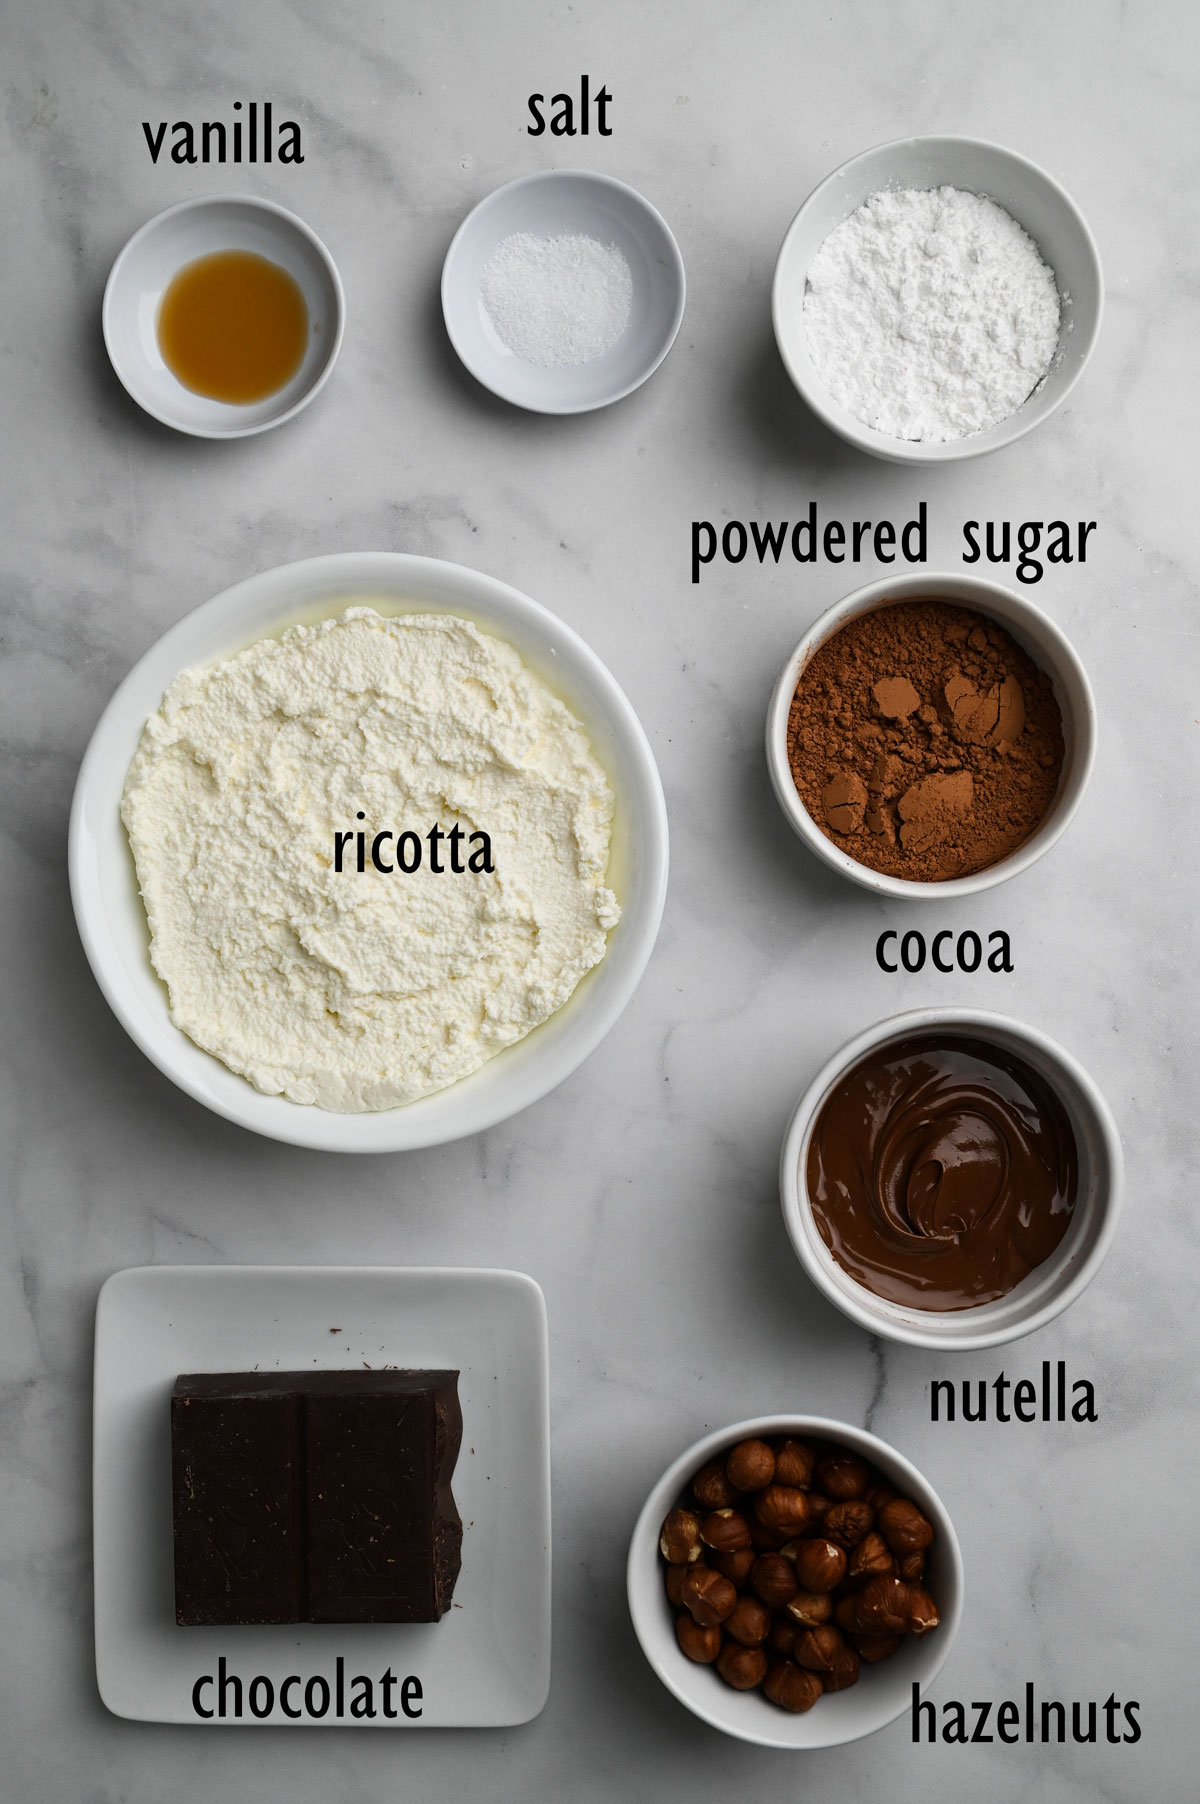 Cannoli filling ingredients Including ricotta, cocoa, Nutella and powdered sugar.